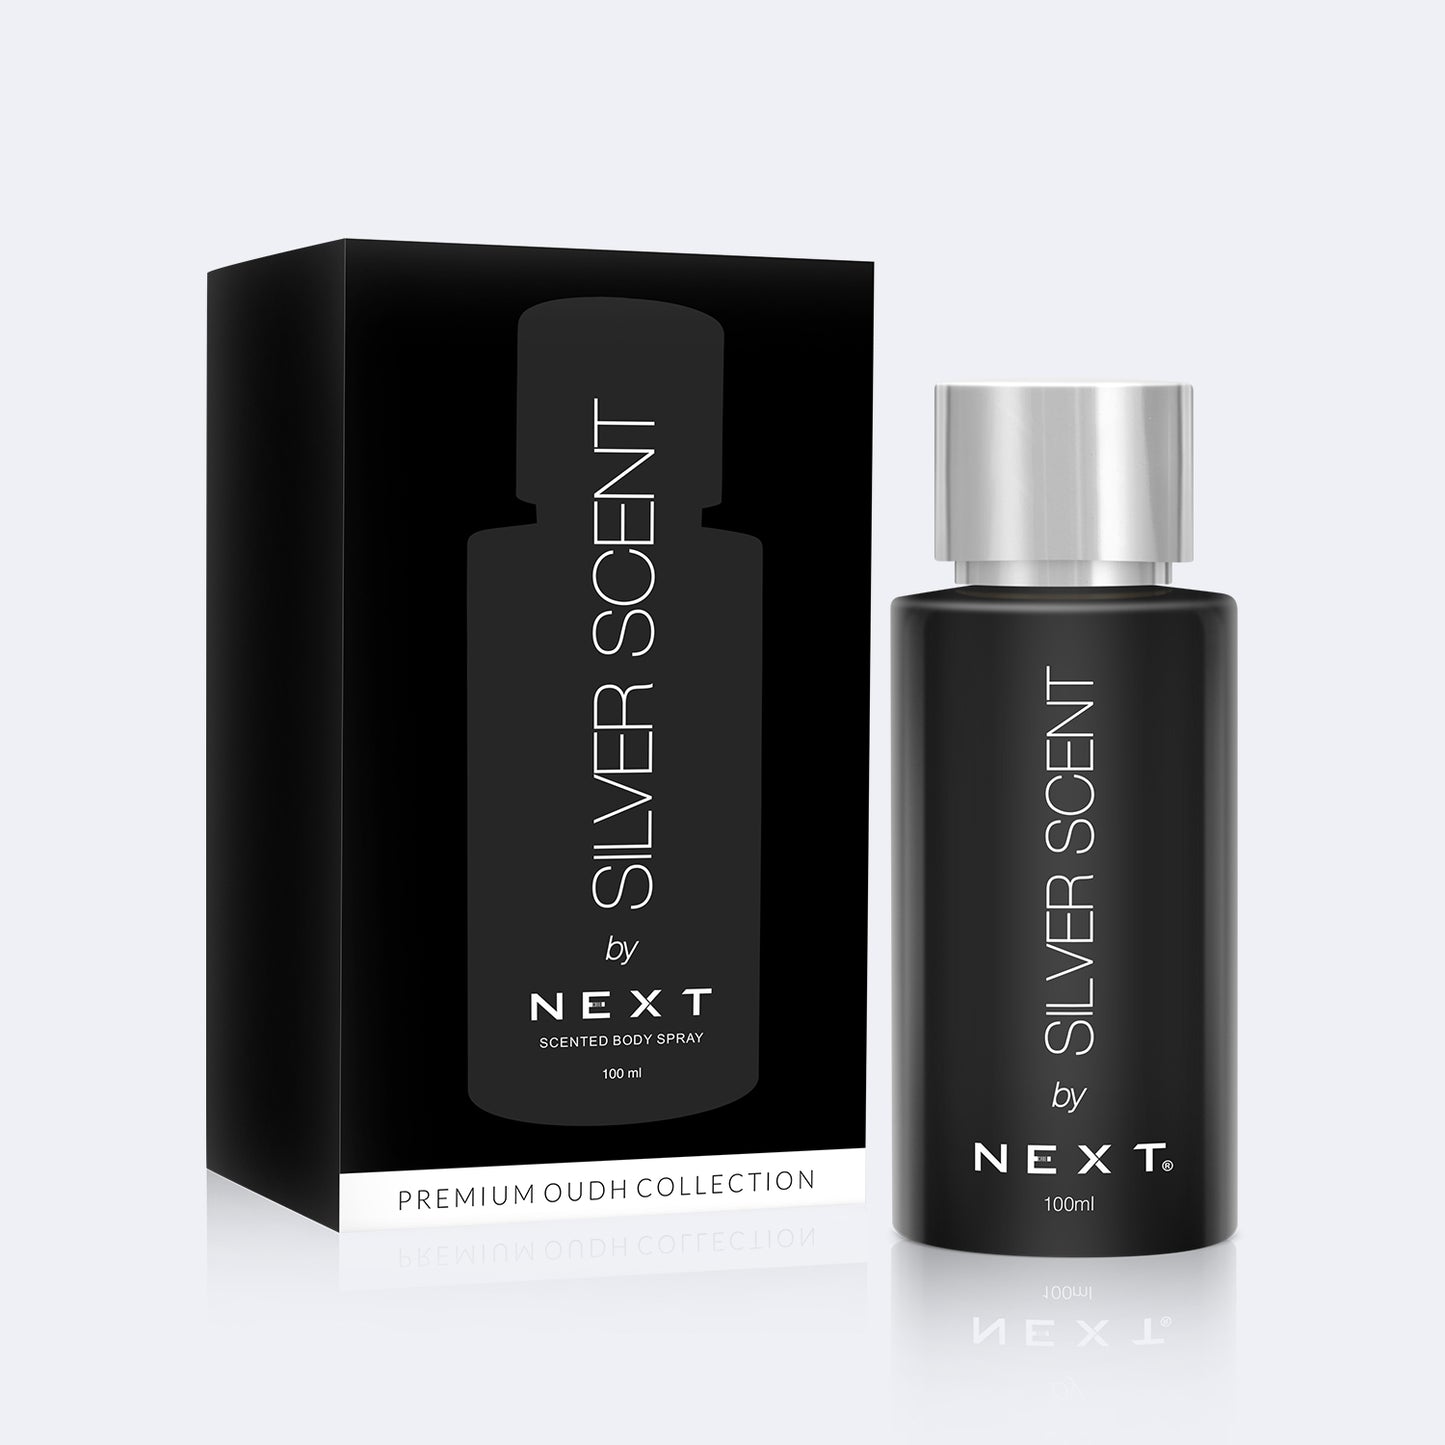 NEXT Silver Scent Oud Perfume - 100ml